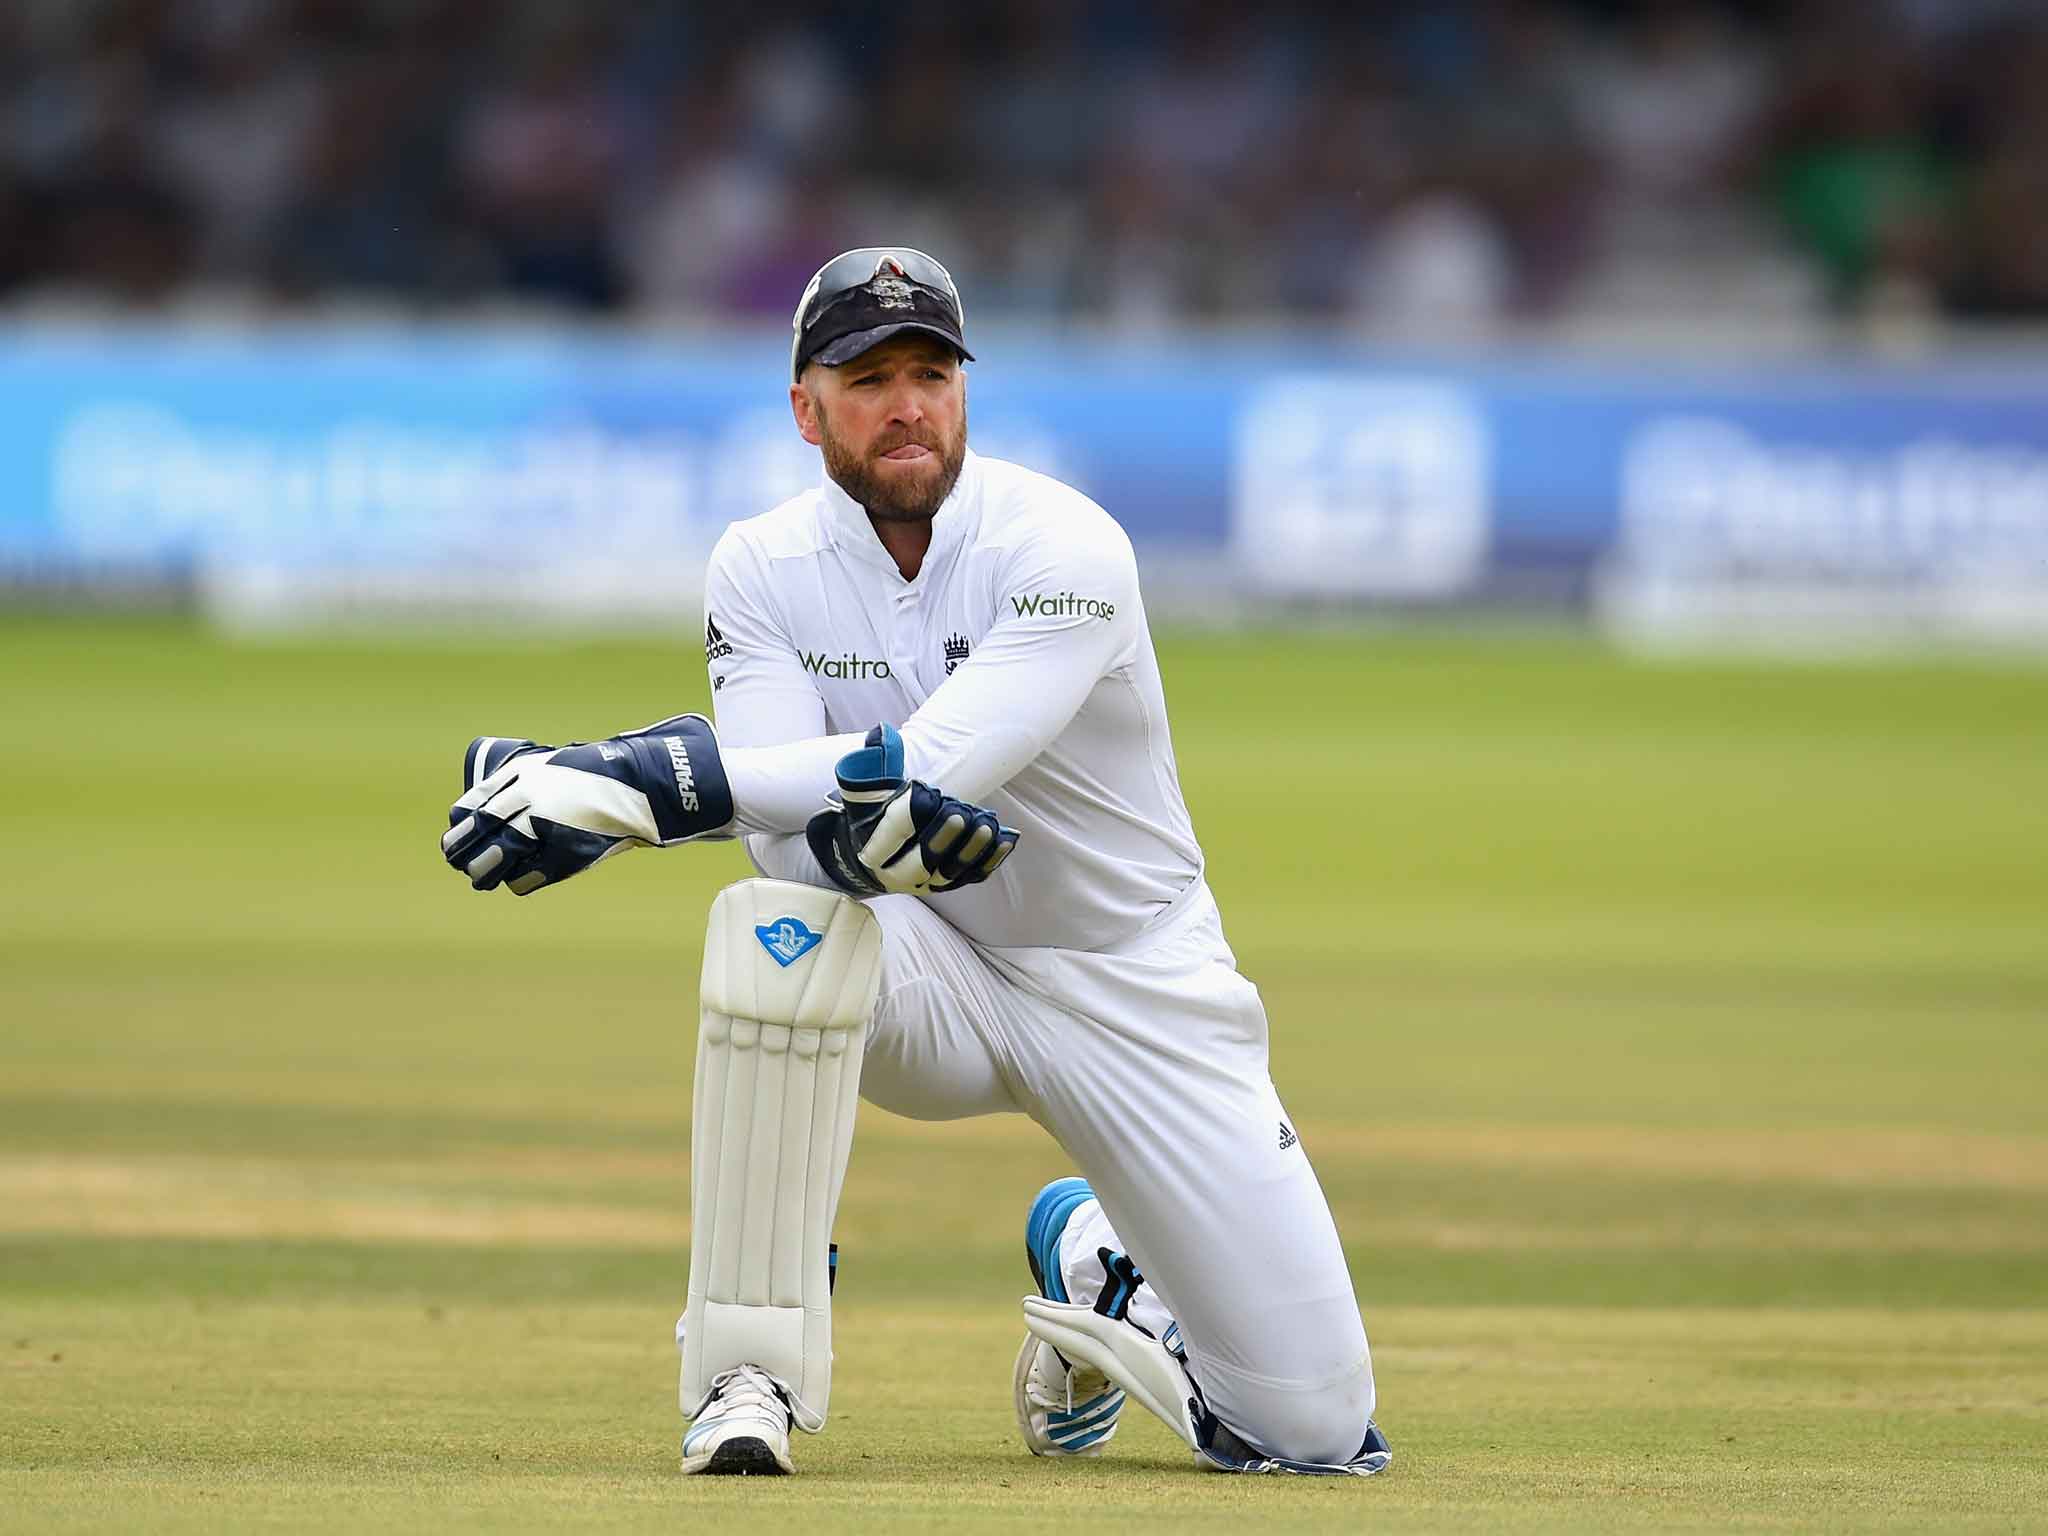 Matt Prior claimed 256 victims in 79 Tests for England and scored 4,099 runs